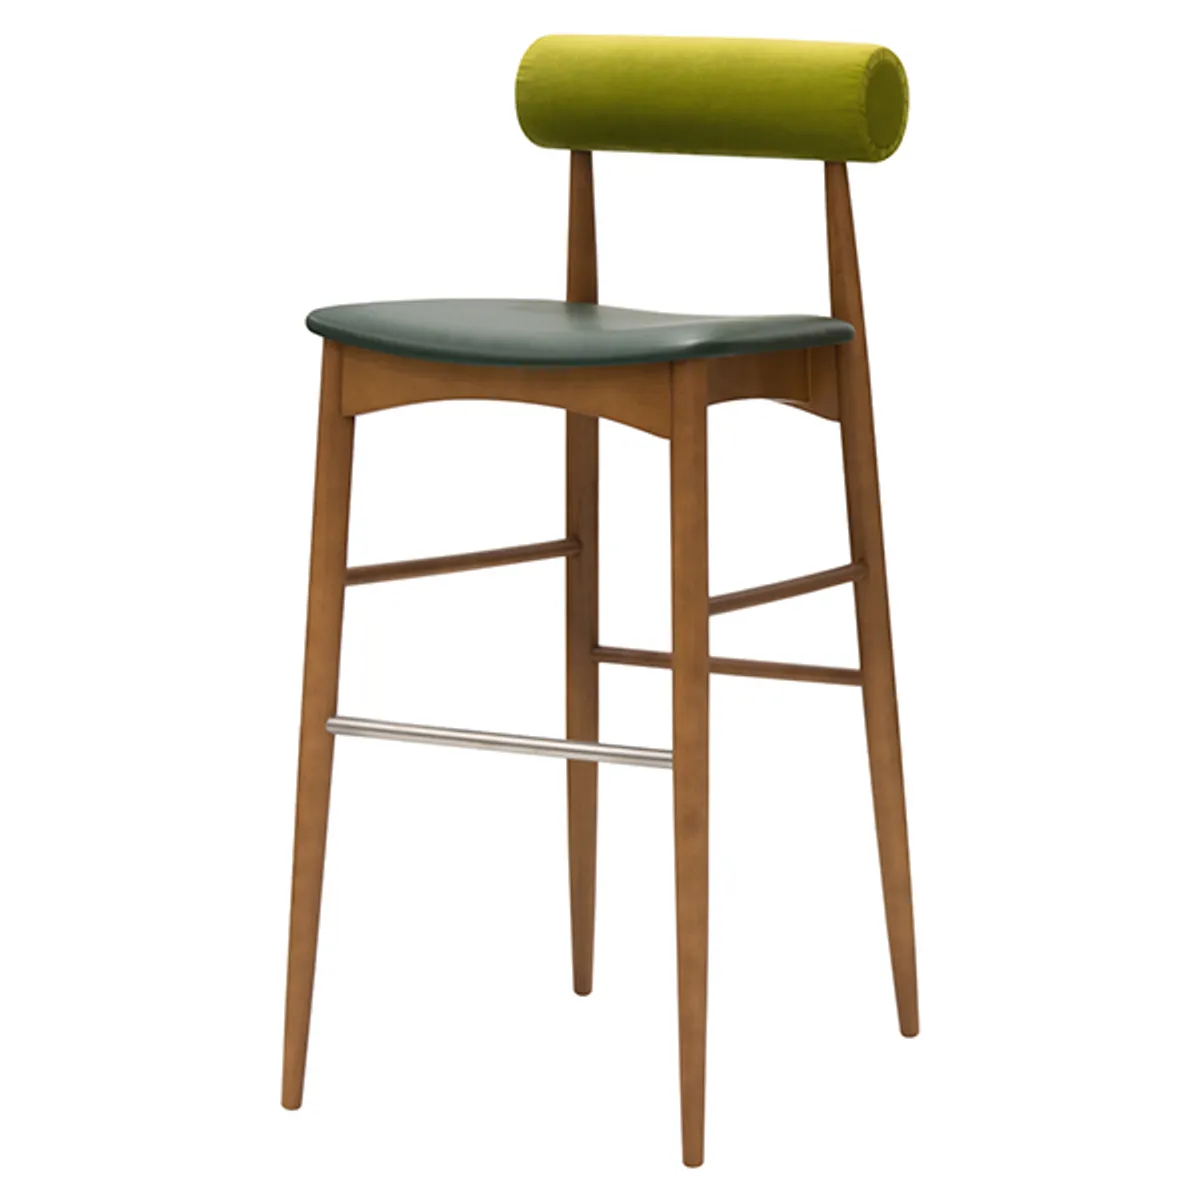 Rolla Bar Stool Quirky Furniture For Hospitality Inside Out Contracts 2